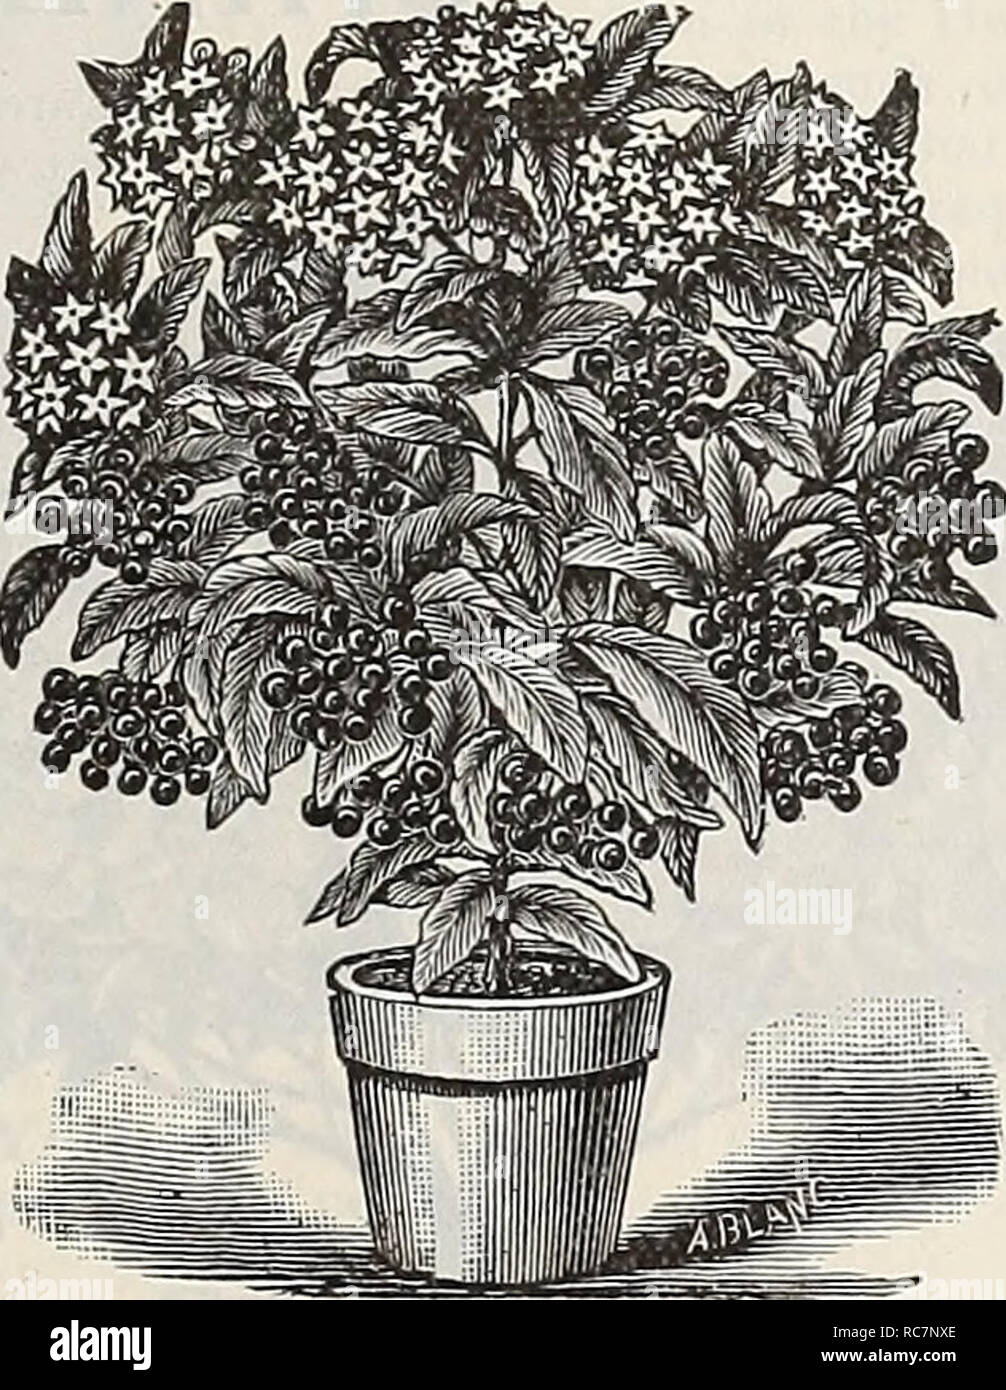 . Dreer's garden calendar : 1898. Seeds Catalogs; Nursery stock Catalogs; Gardening Catalogs; Flowers Seeds Catalogs; Vegetables Seeds Catalogs. Allamanda Williamsii. ANTHEMIS CORONARIA DOUBI.E. One of the must useful plants for bedding ur pot culture bears iis golden-yellow double flowers pro- fusely during the entire season. 15 cts. each, $1.50 per doz. ARDISIA CRENUEATA. A very ornamental greenhouse plant, with dark evergreen foliage, producing clusters of brilliant red berries ; a first-class house- plant in winter. (See cut.) 25, 50 and 75 cts. each, according to size. ARISTOEOCHIA EEEGAN Stock Photo